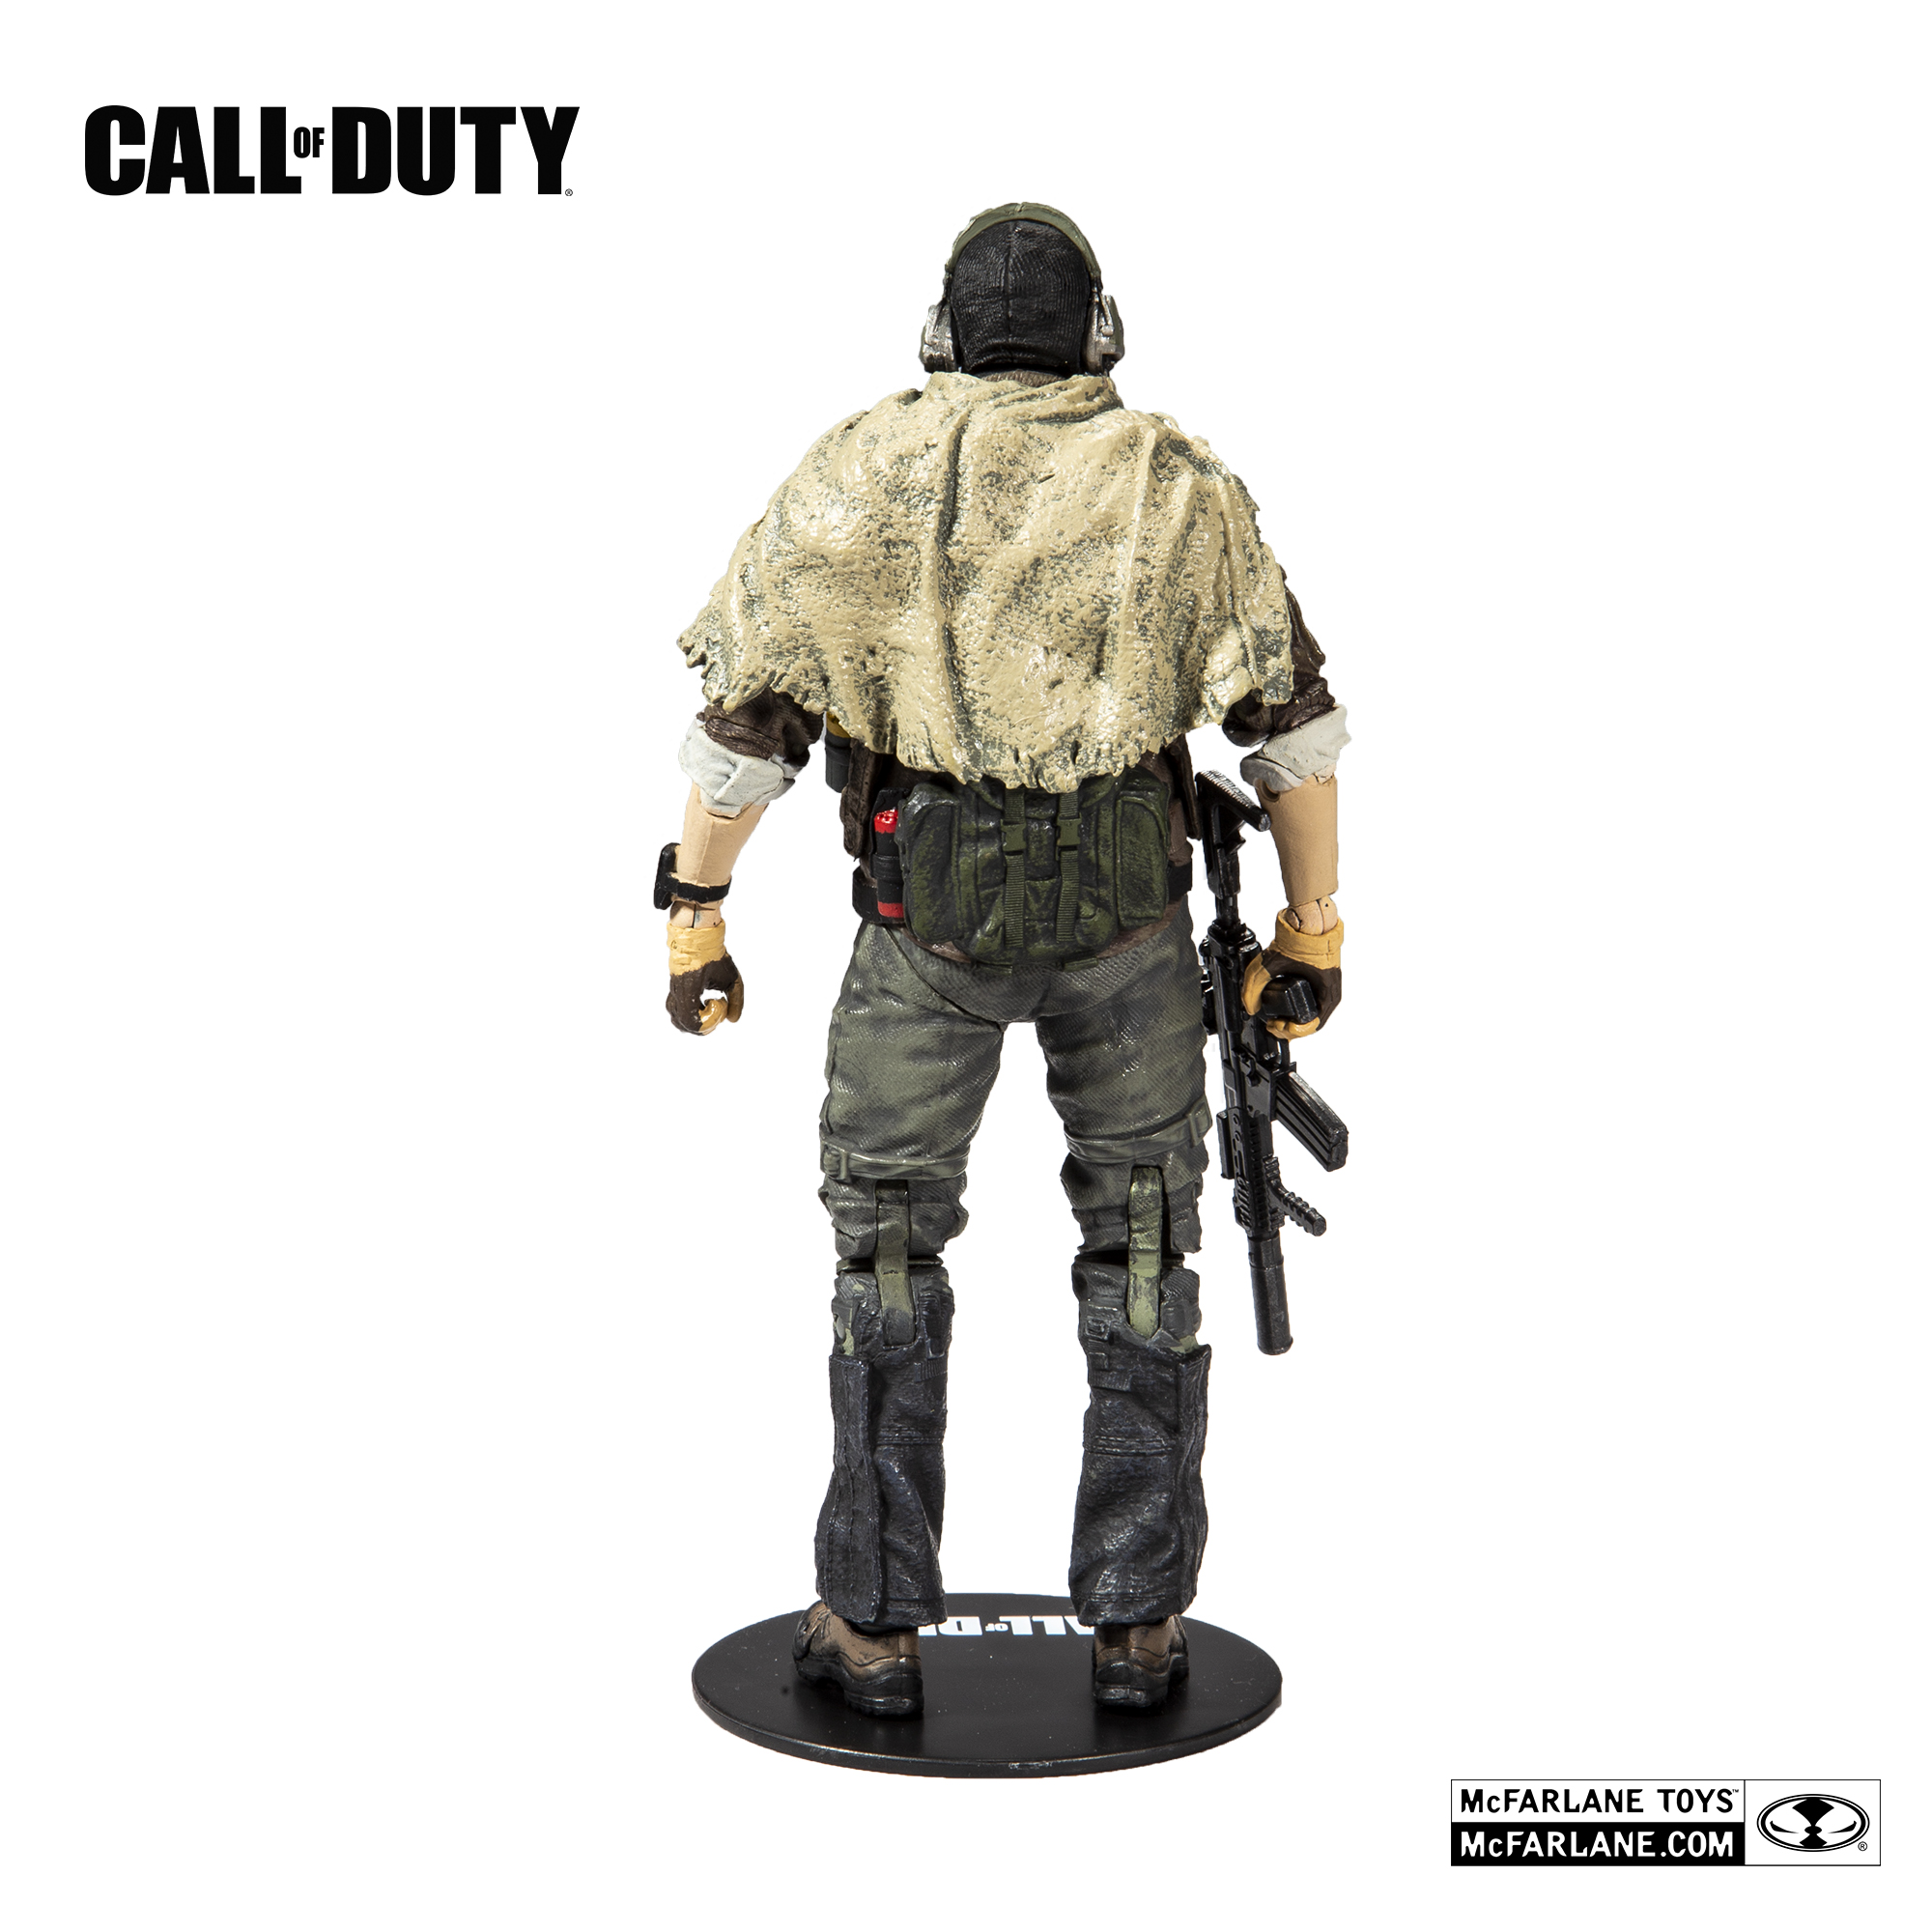 Call of Duty's Ghost Enters the War with McFarlane Toys